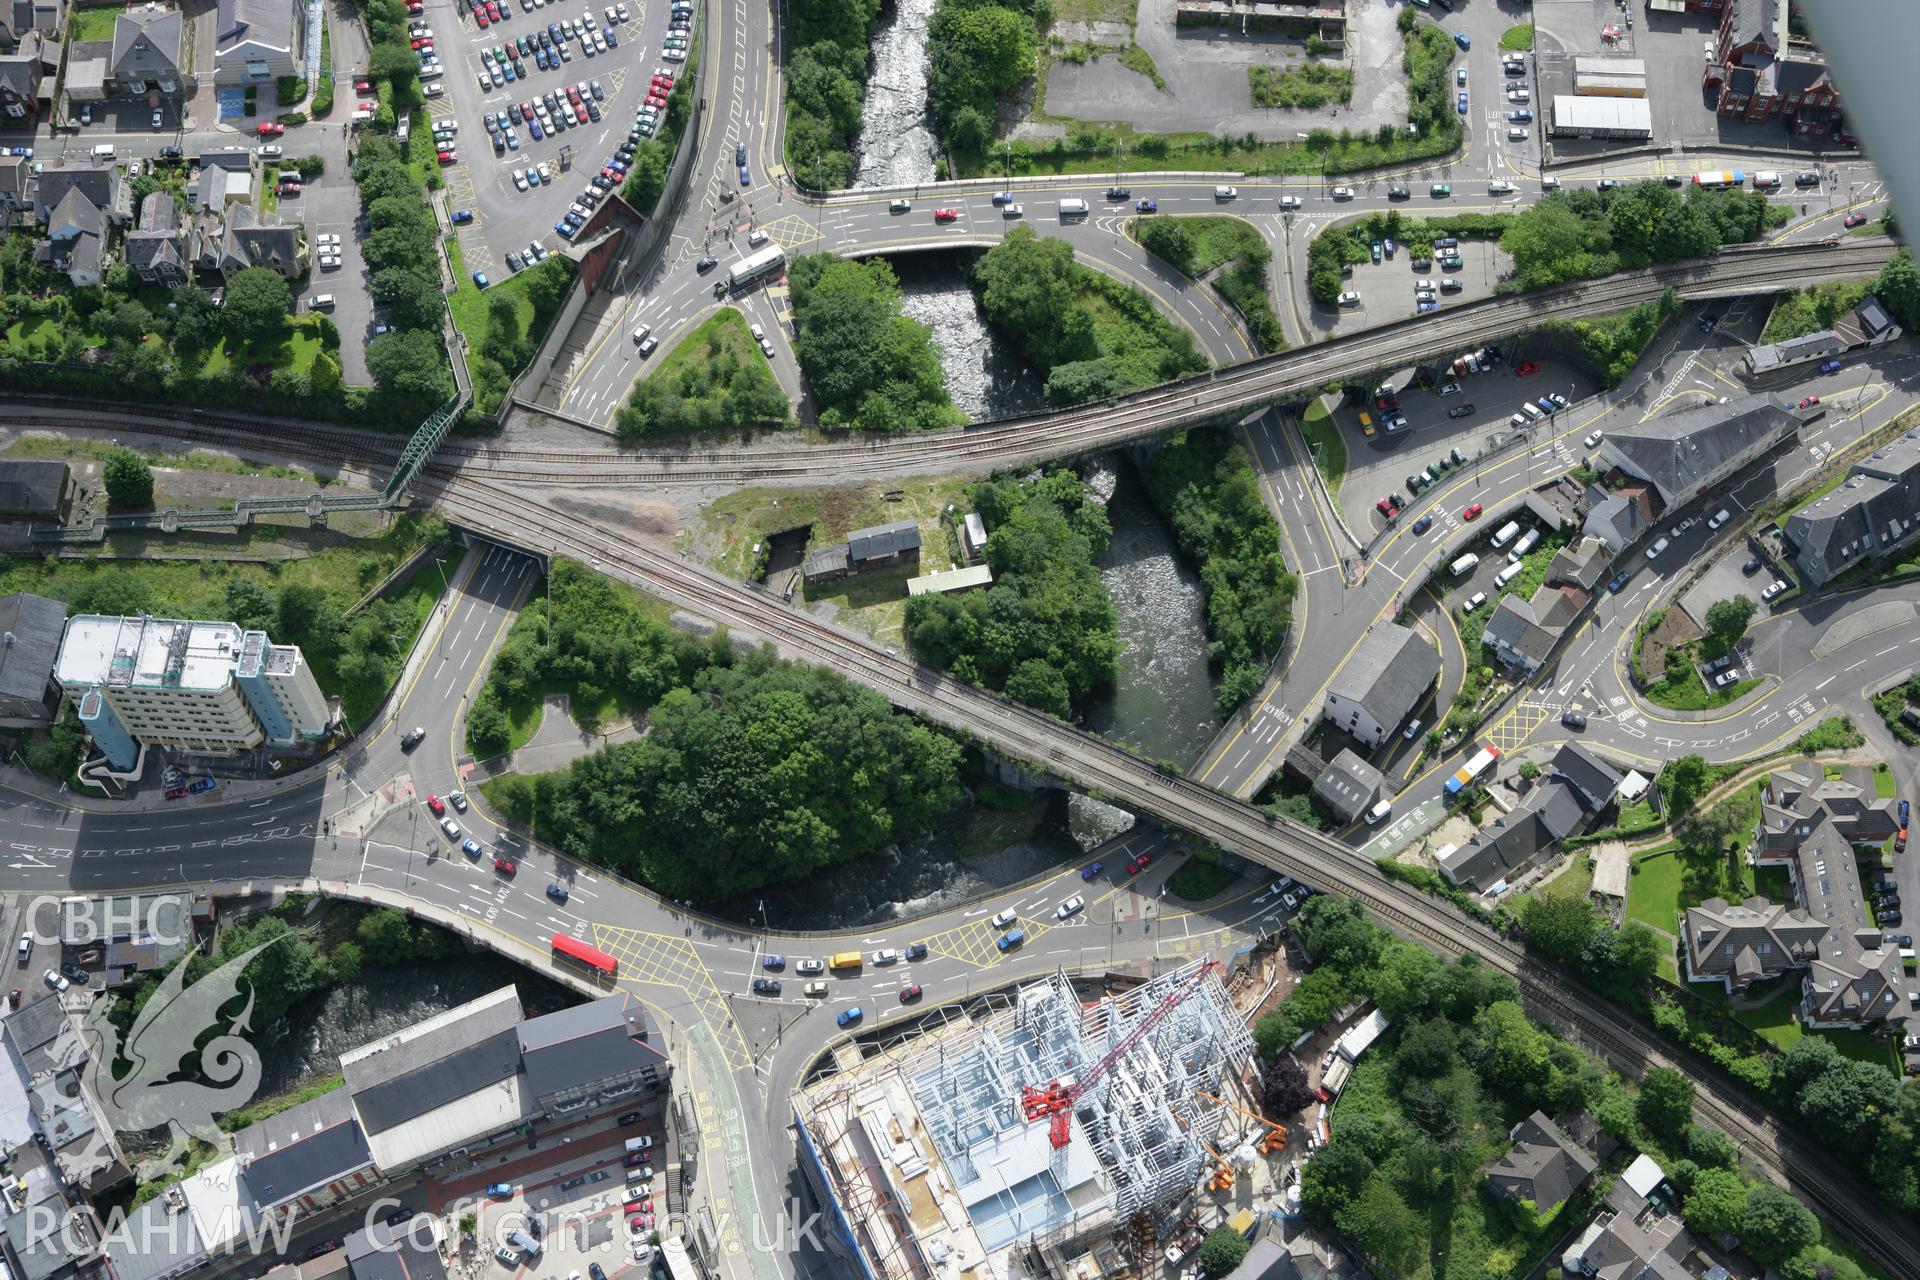 RCAHMW colour oblique aerial photograph of Pontypridd showing the railway junction and nearby roads. Taken on 30 July 2007 by Toby Driver